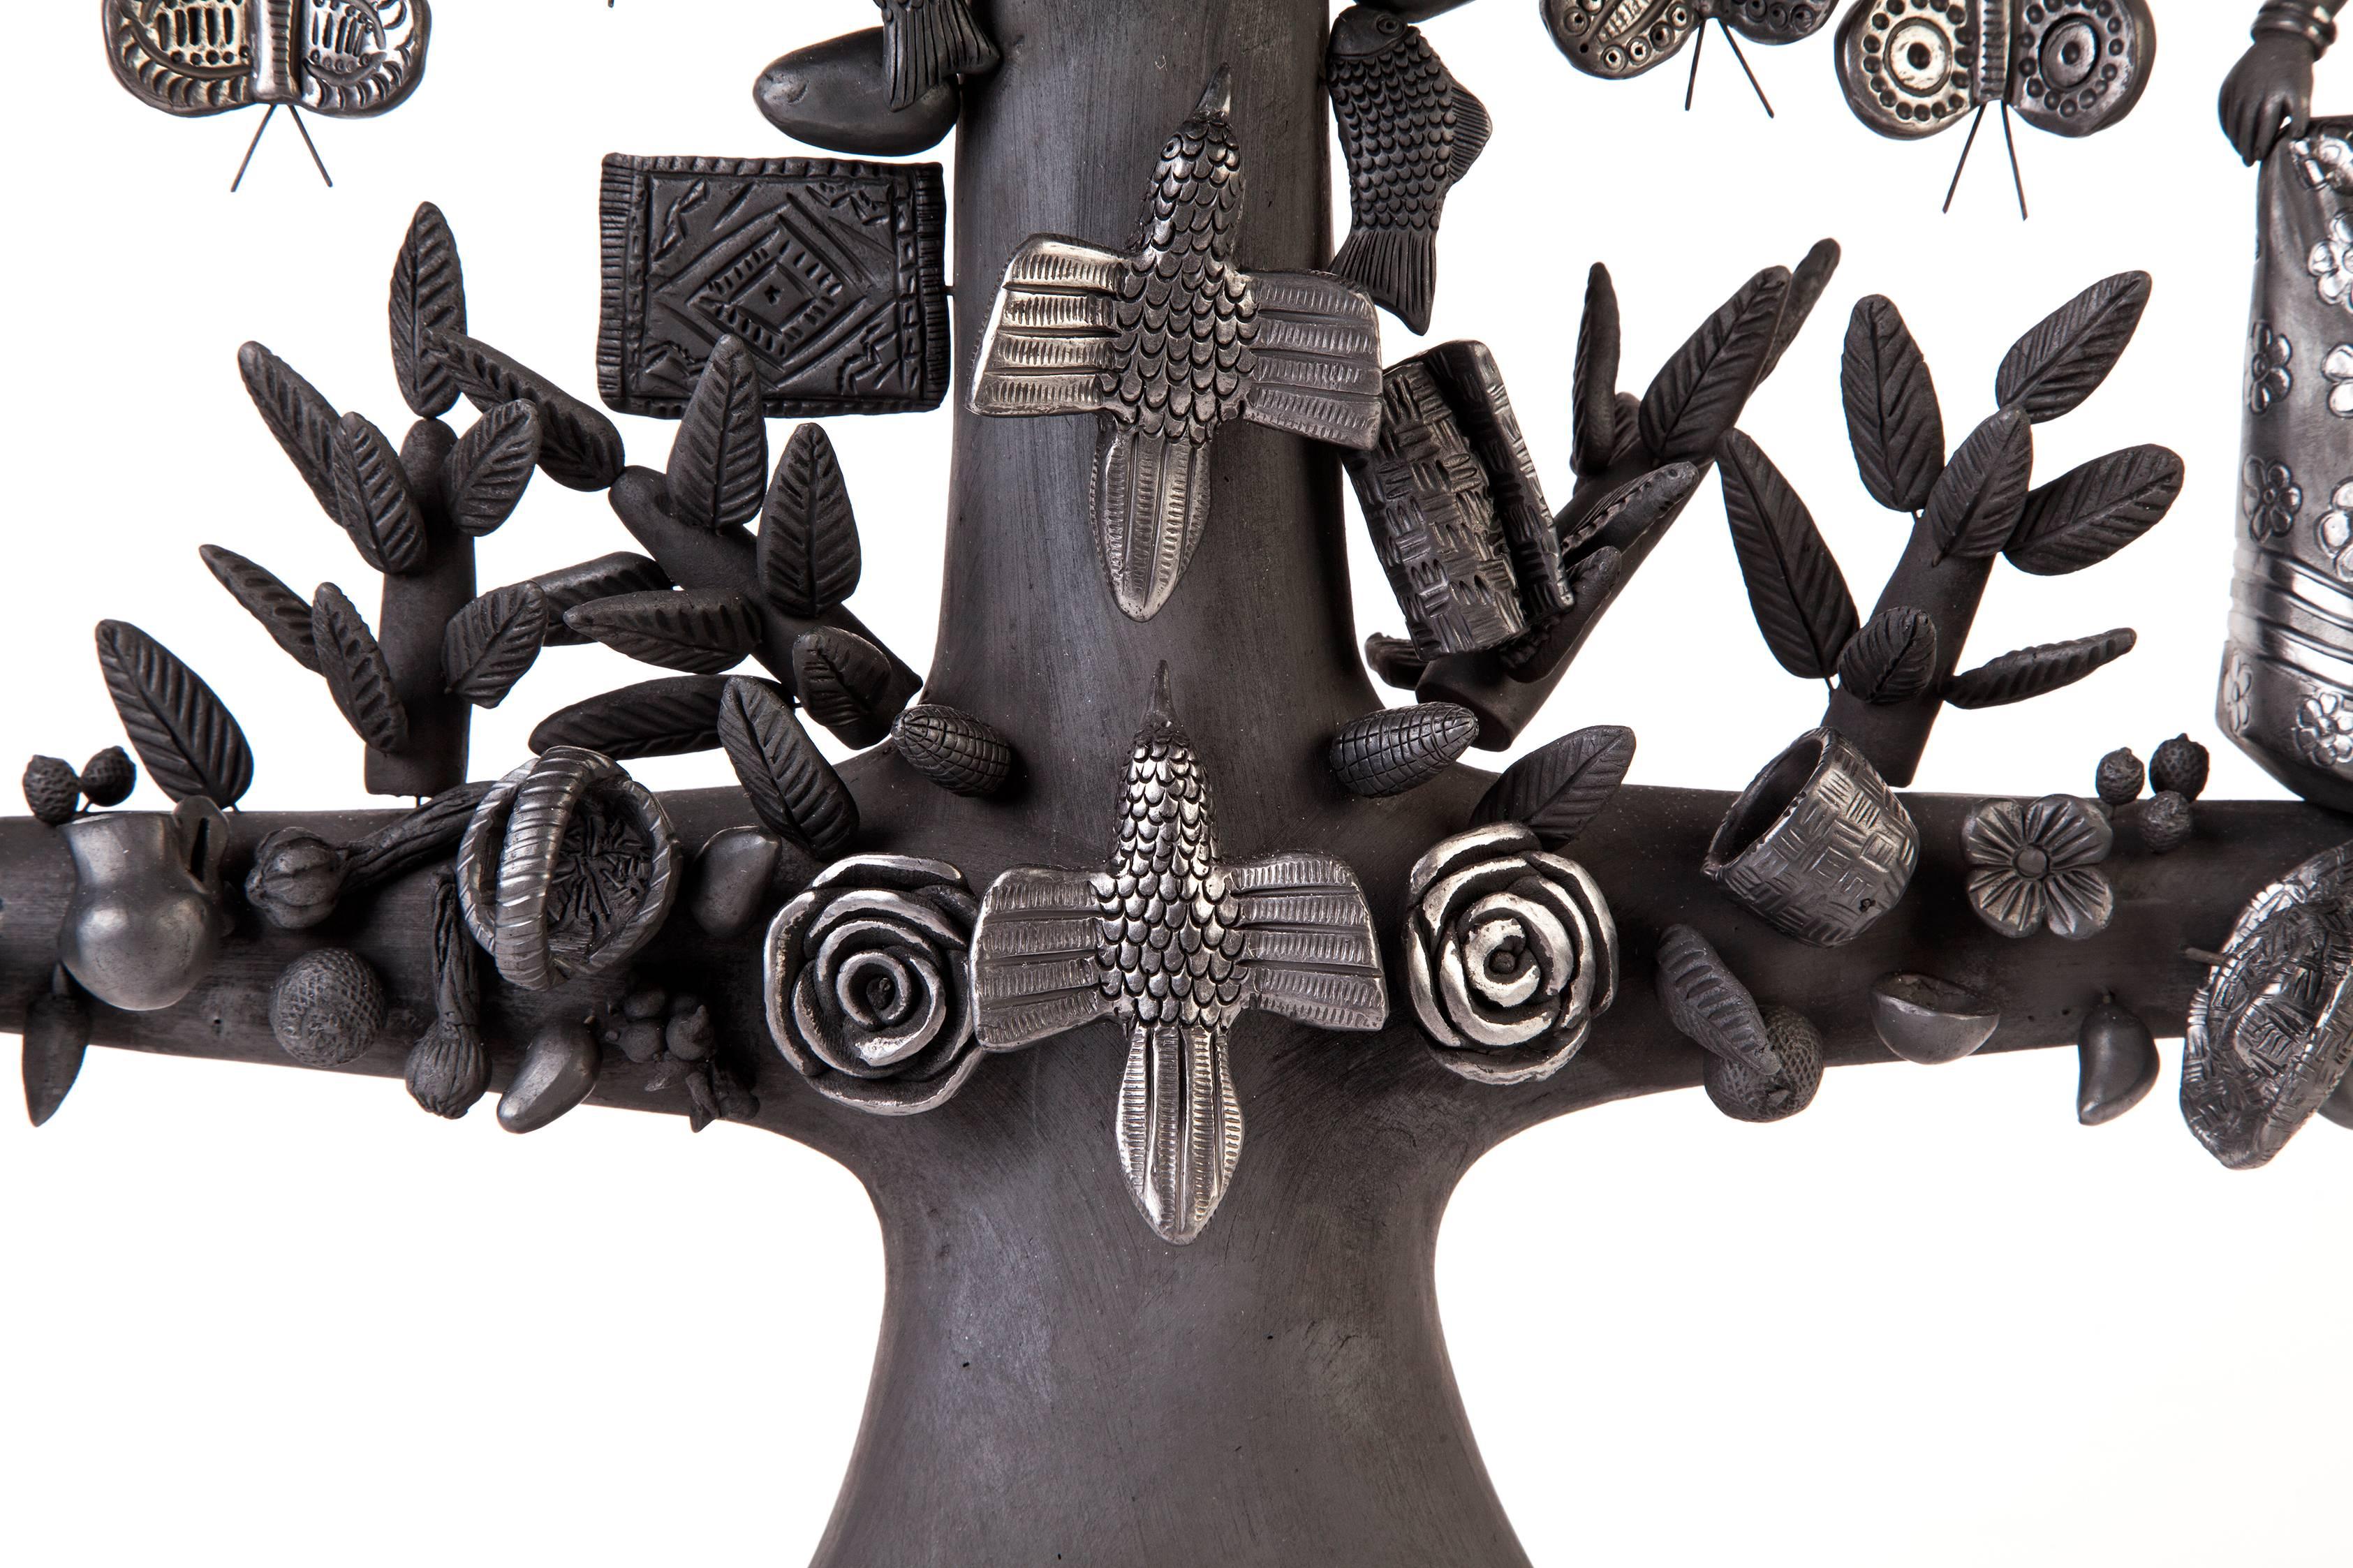 FREE SHIPPING TO WORLDWIDE!

Artisan: Magdalena Pedro Martinez

Made with Black Clay, hand-modeled technique, polished with quartz and cooked in a wood-fired oven. The 8 Regions of Oaxaca are: Cañada, Costa, Istmo, Mixteca, Papaloapan, Sierra Norte,